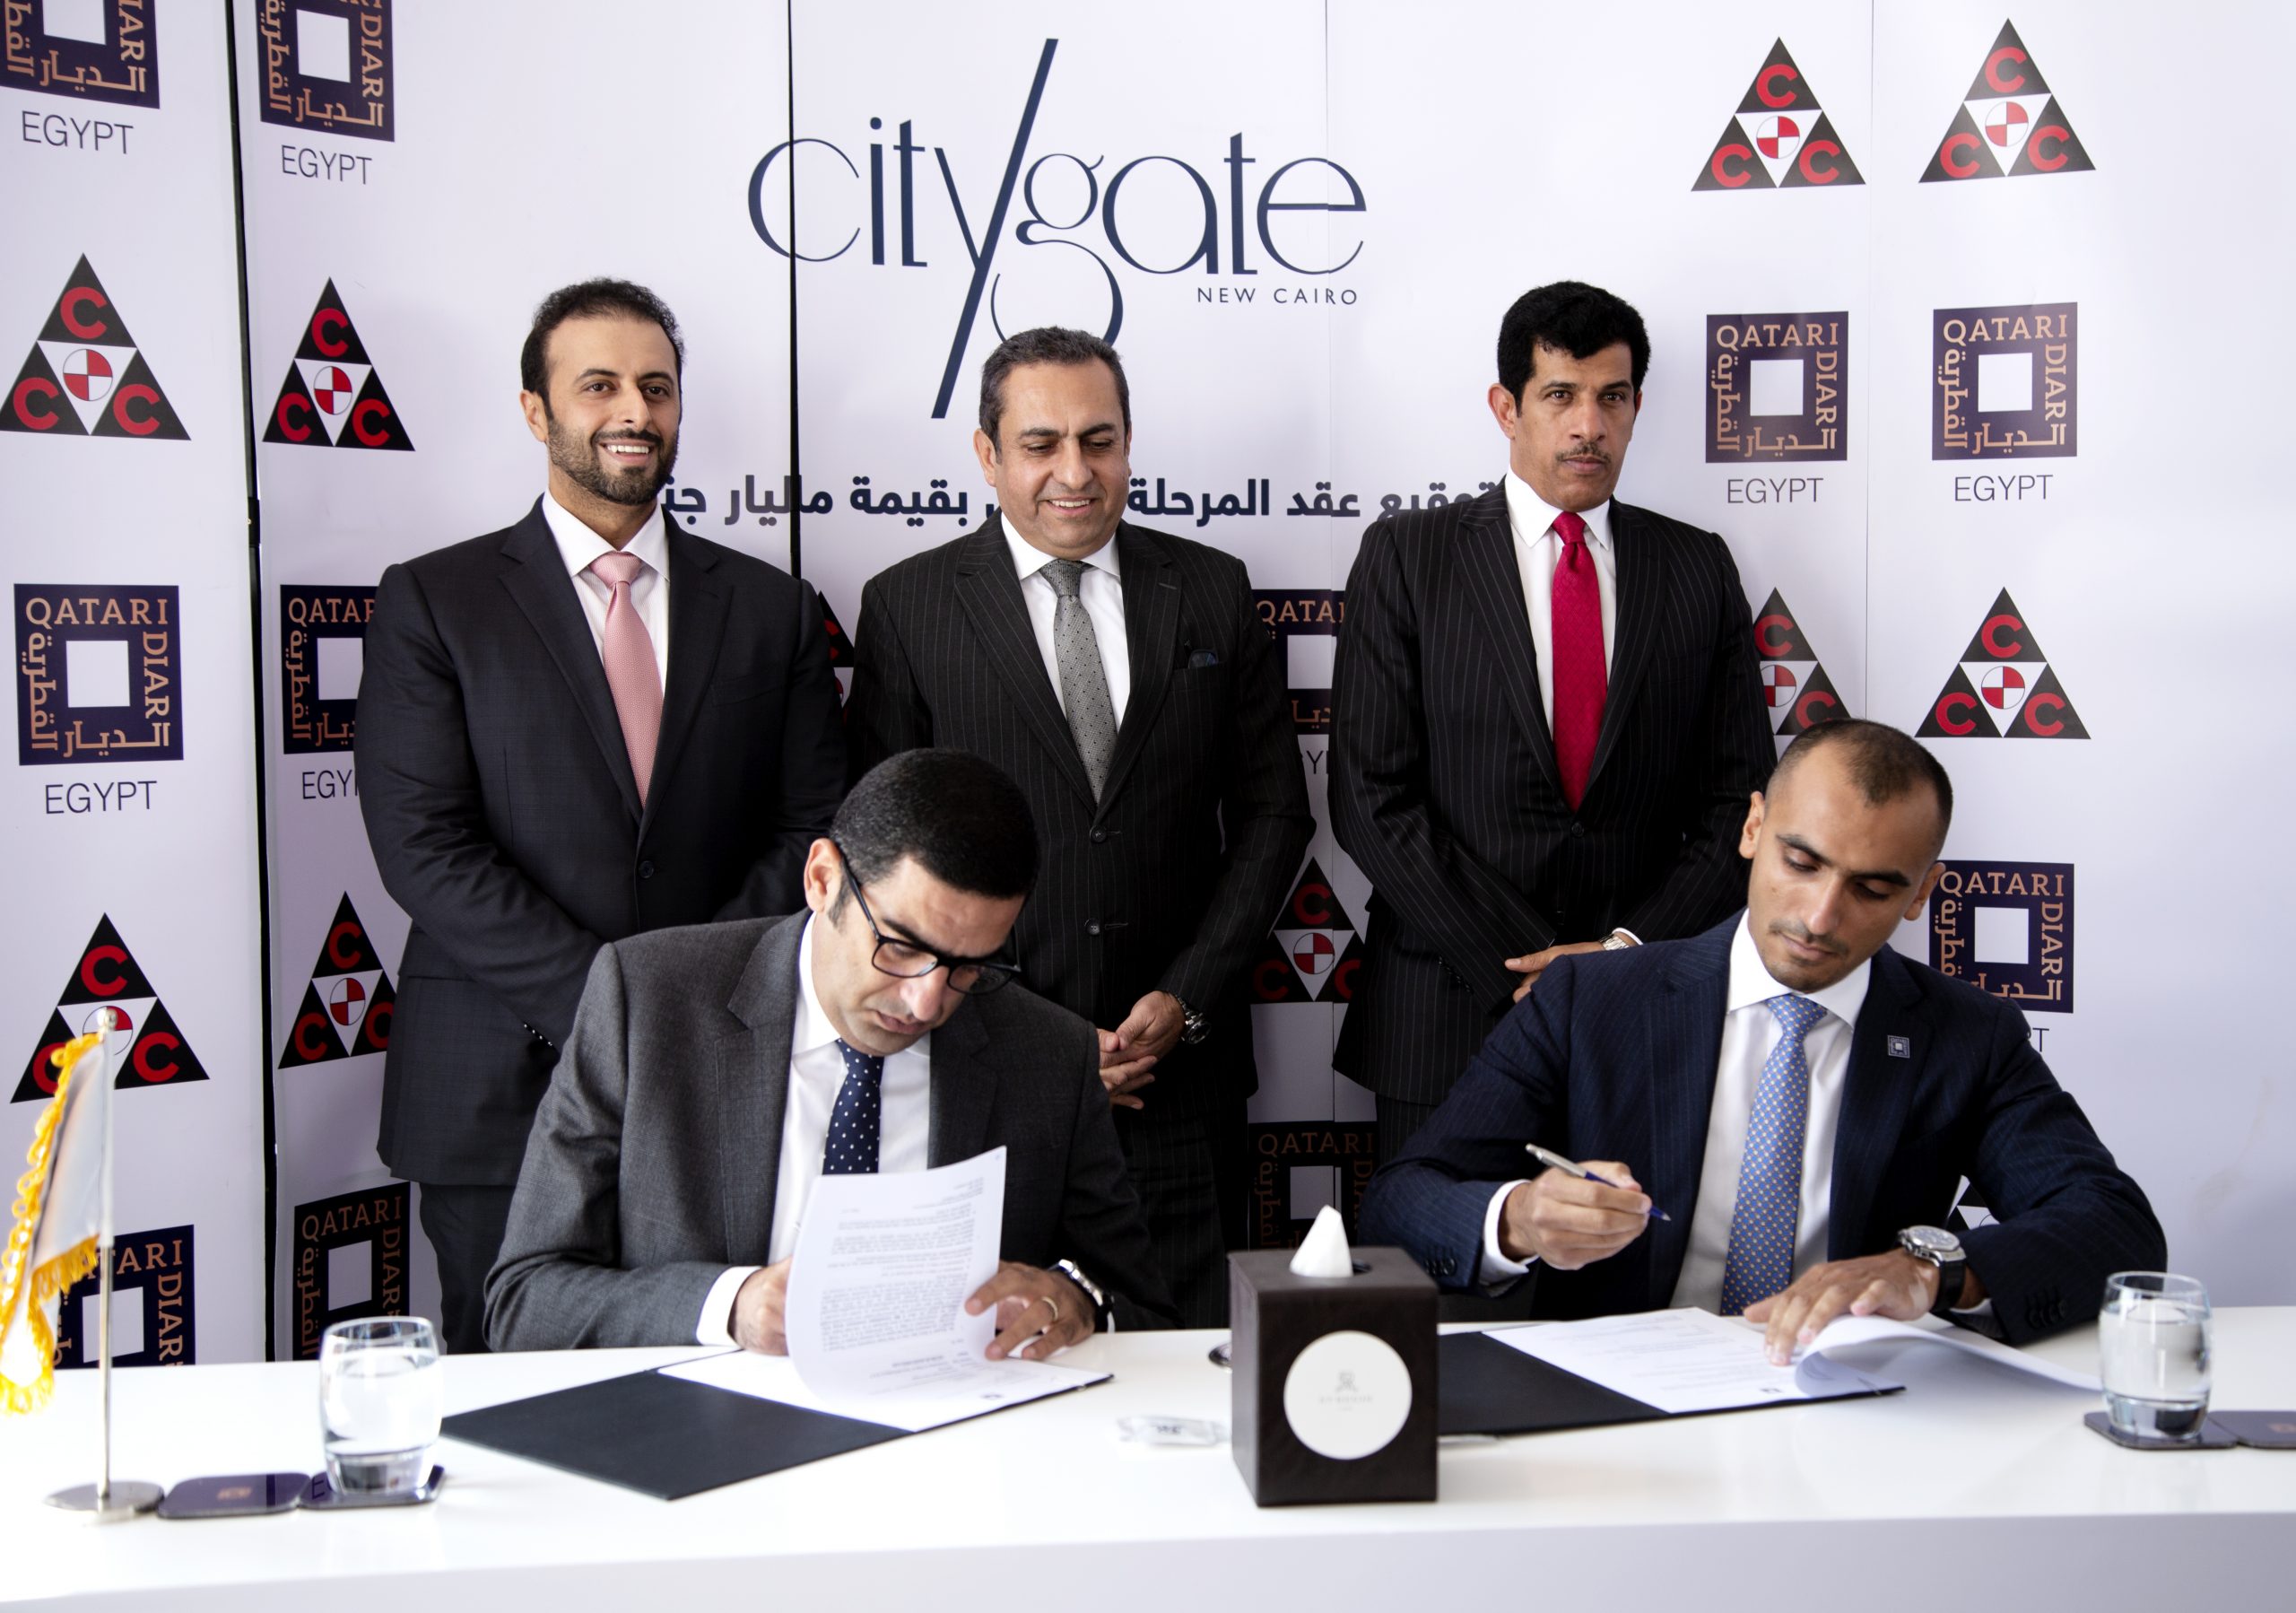 Qatari Diar signs EGP 1 billion contract for City Gate New Cairo phase one